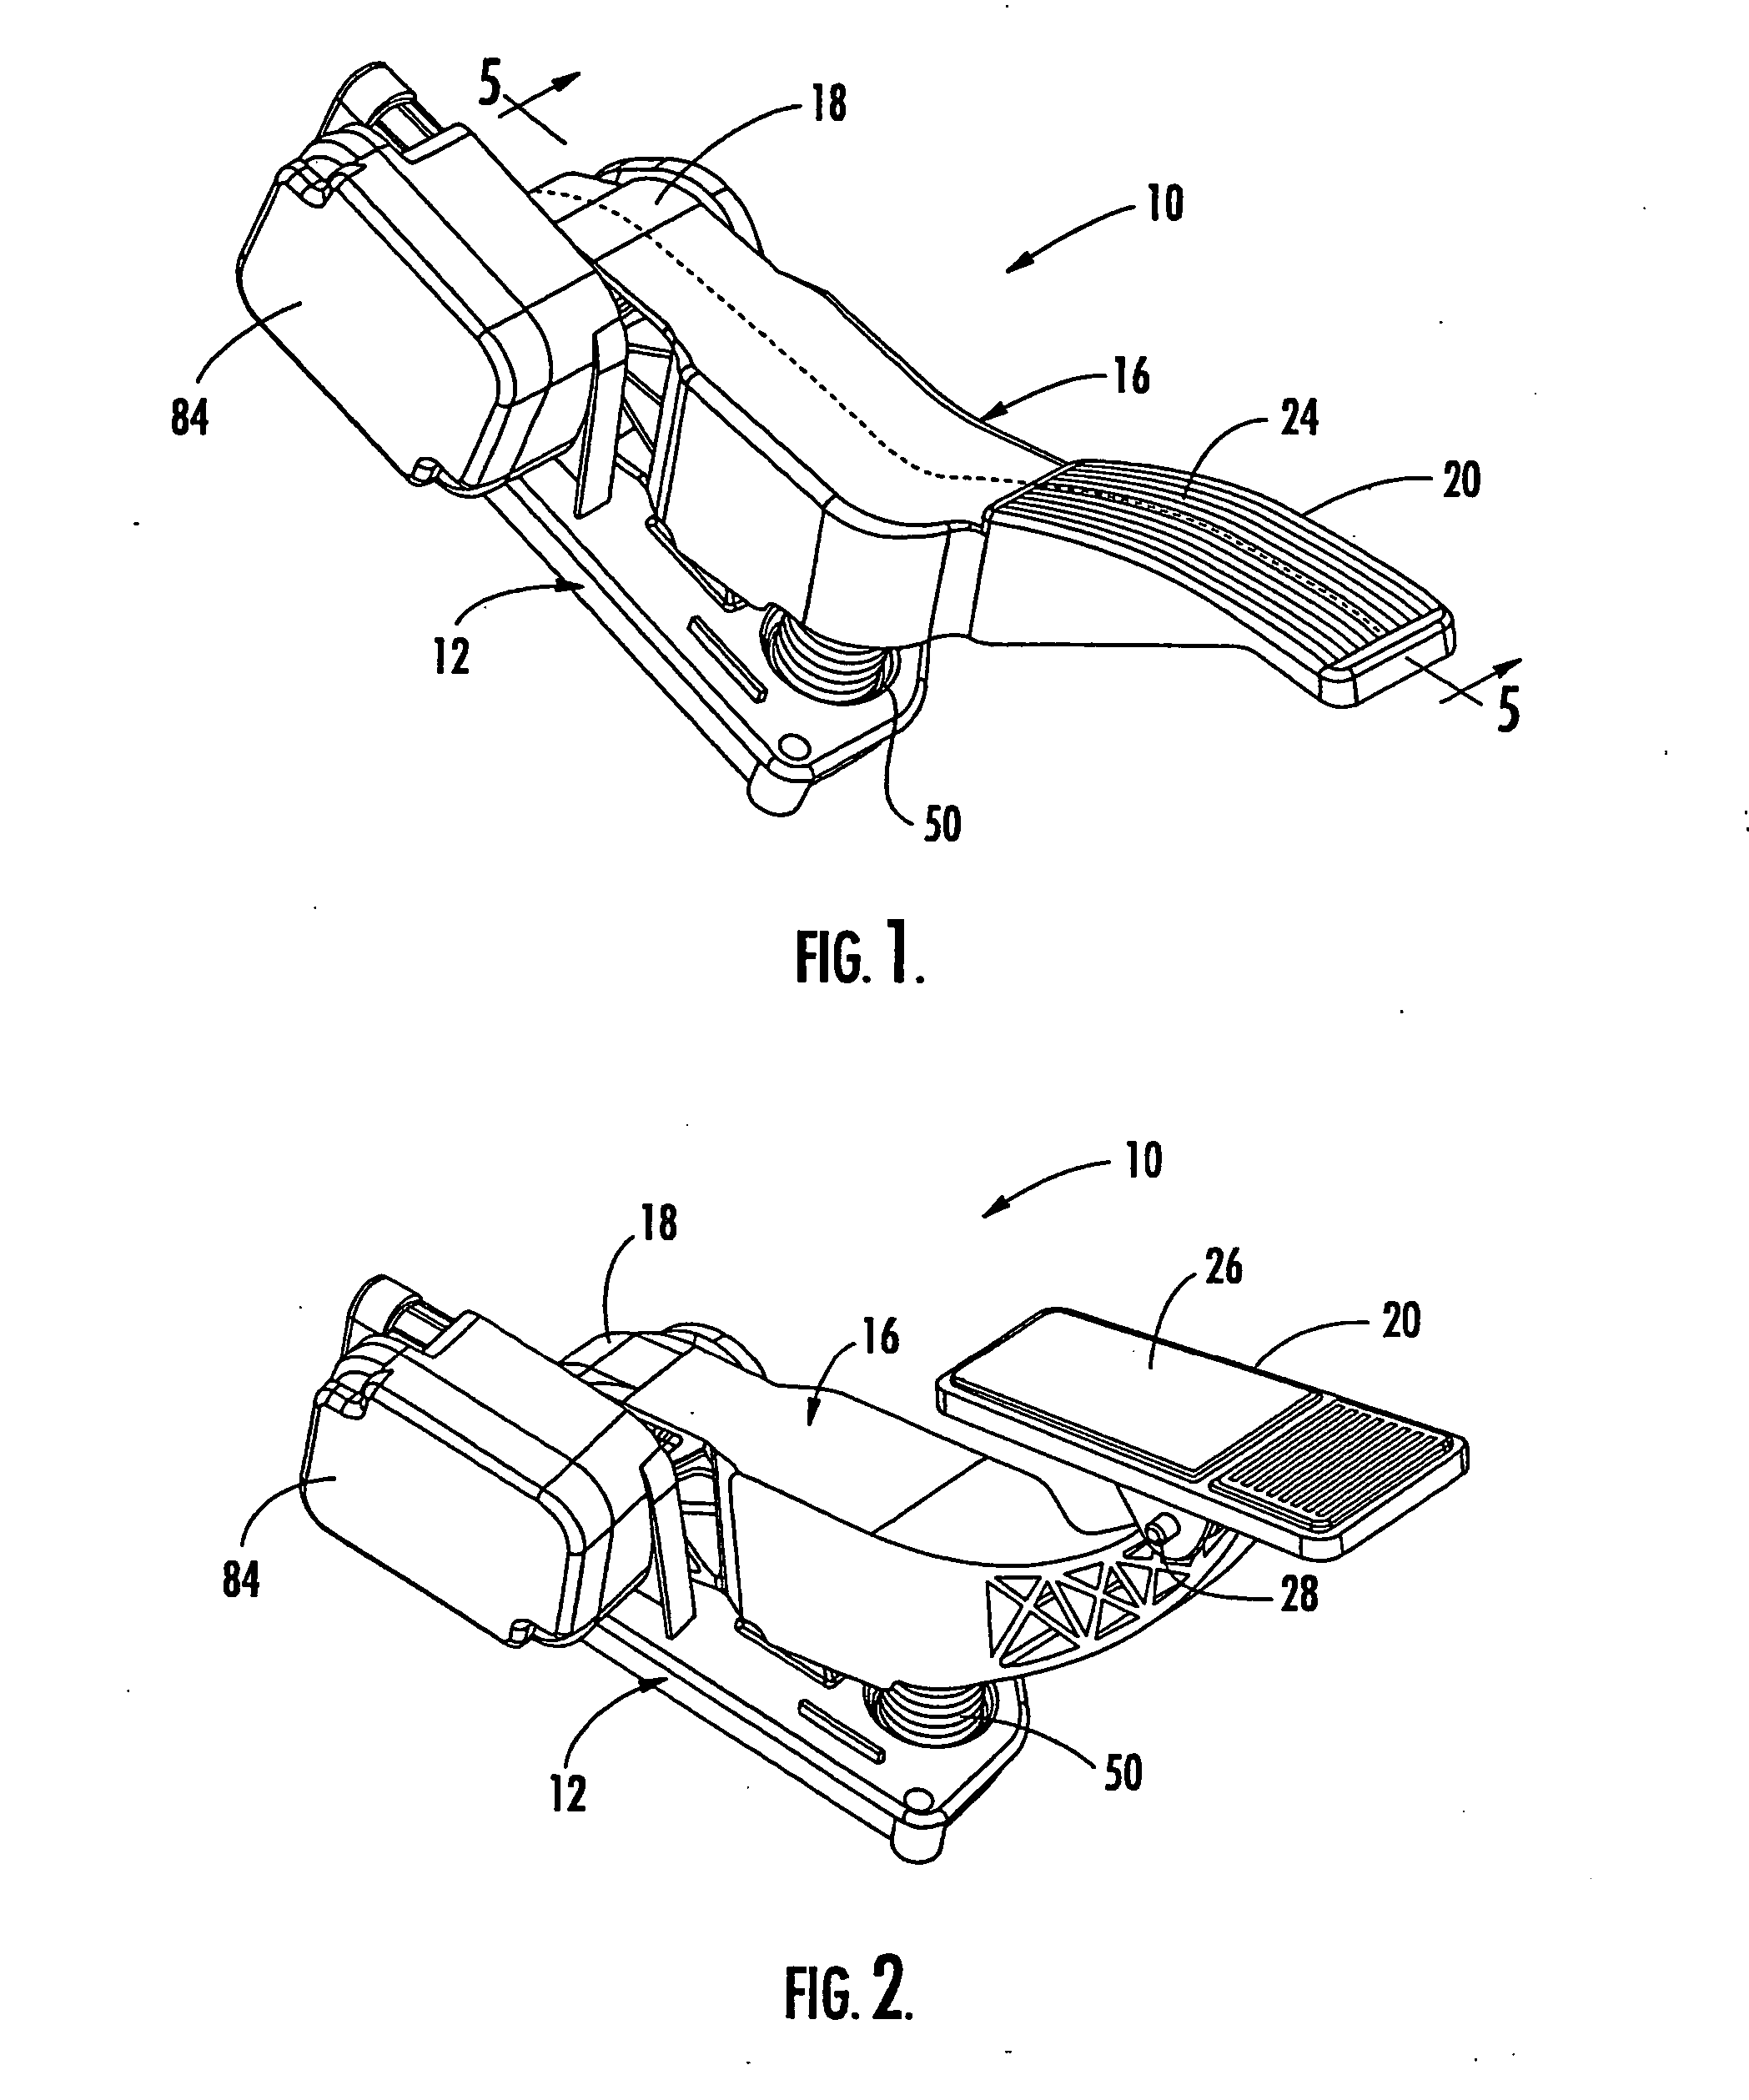 Electronic pedal assembly and method for providing a tuneable hysteresis force